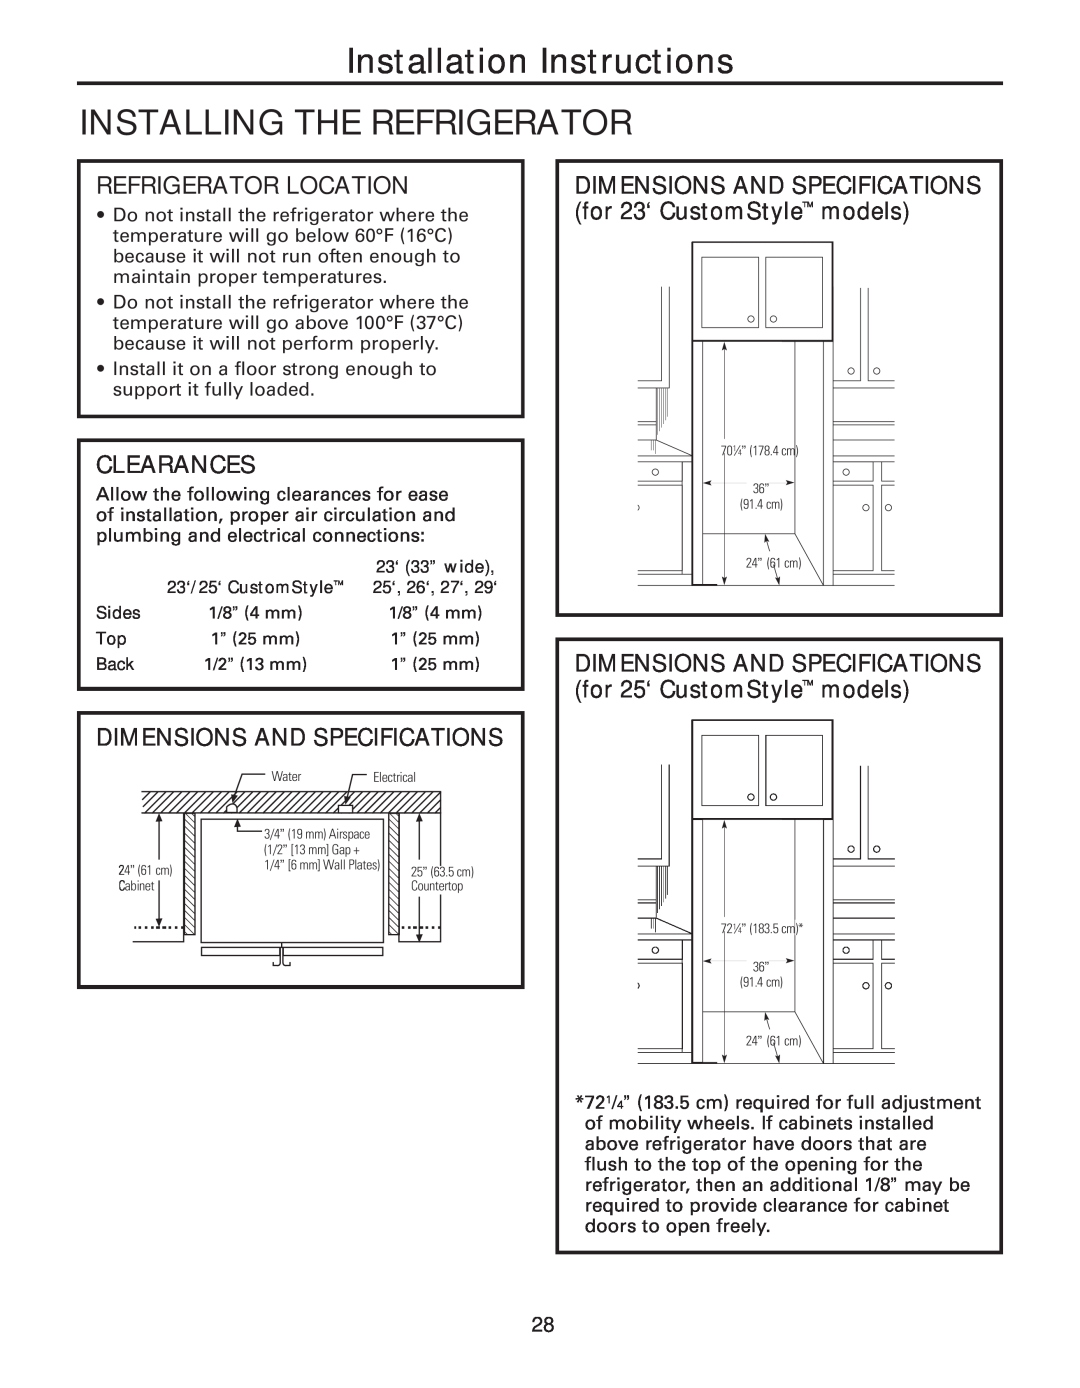 GE 49-60637, 200D8074P043 manual Installation Instructions INSTALLING THE REFRIGERATOR, Refrigerator Location, Clearances 